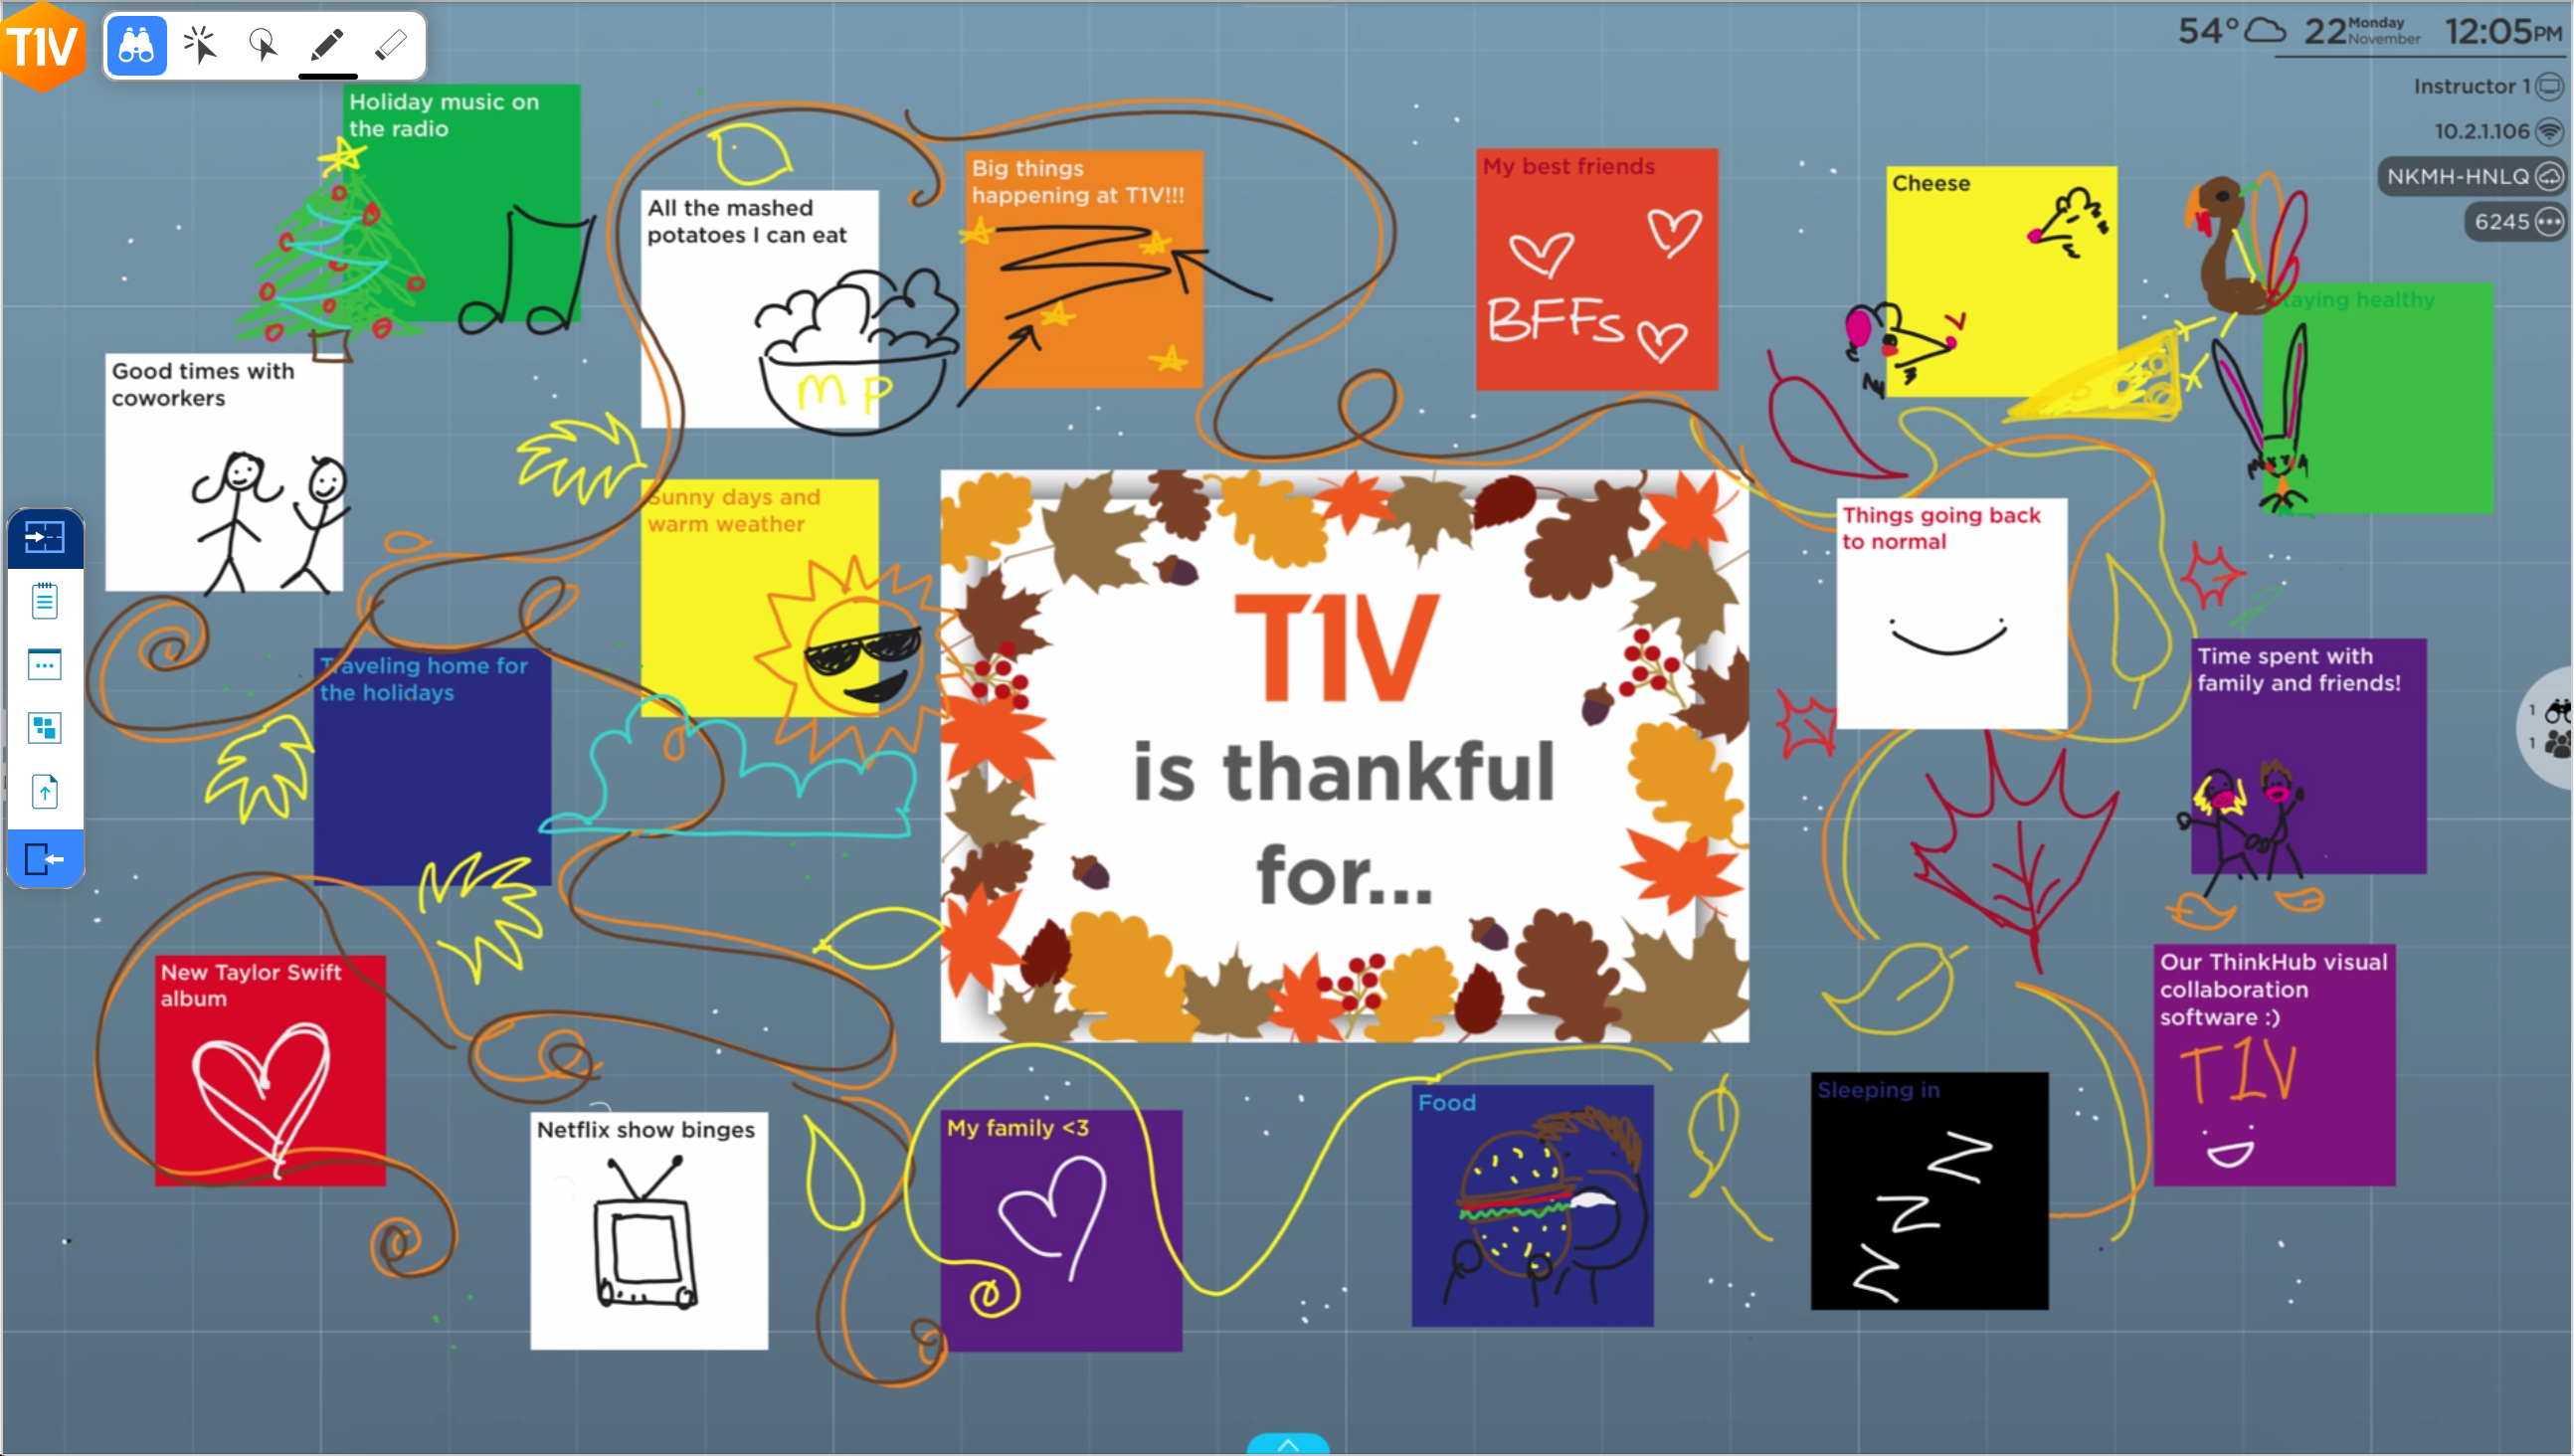 t1v-is-grateful-for-thanksgiving-thinkhub-canvas